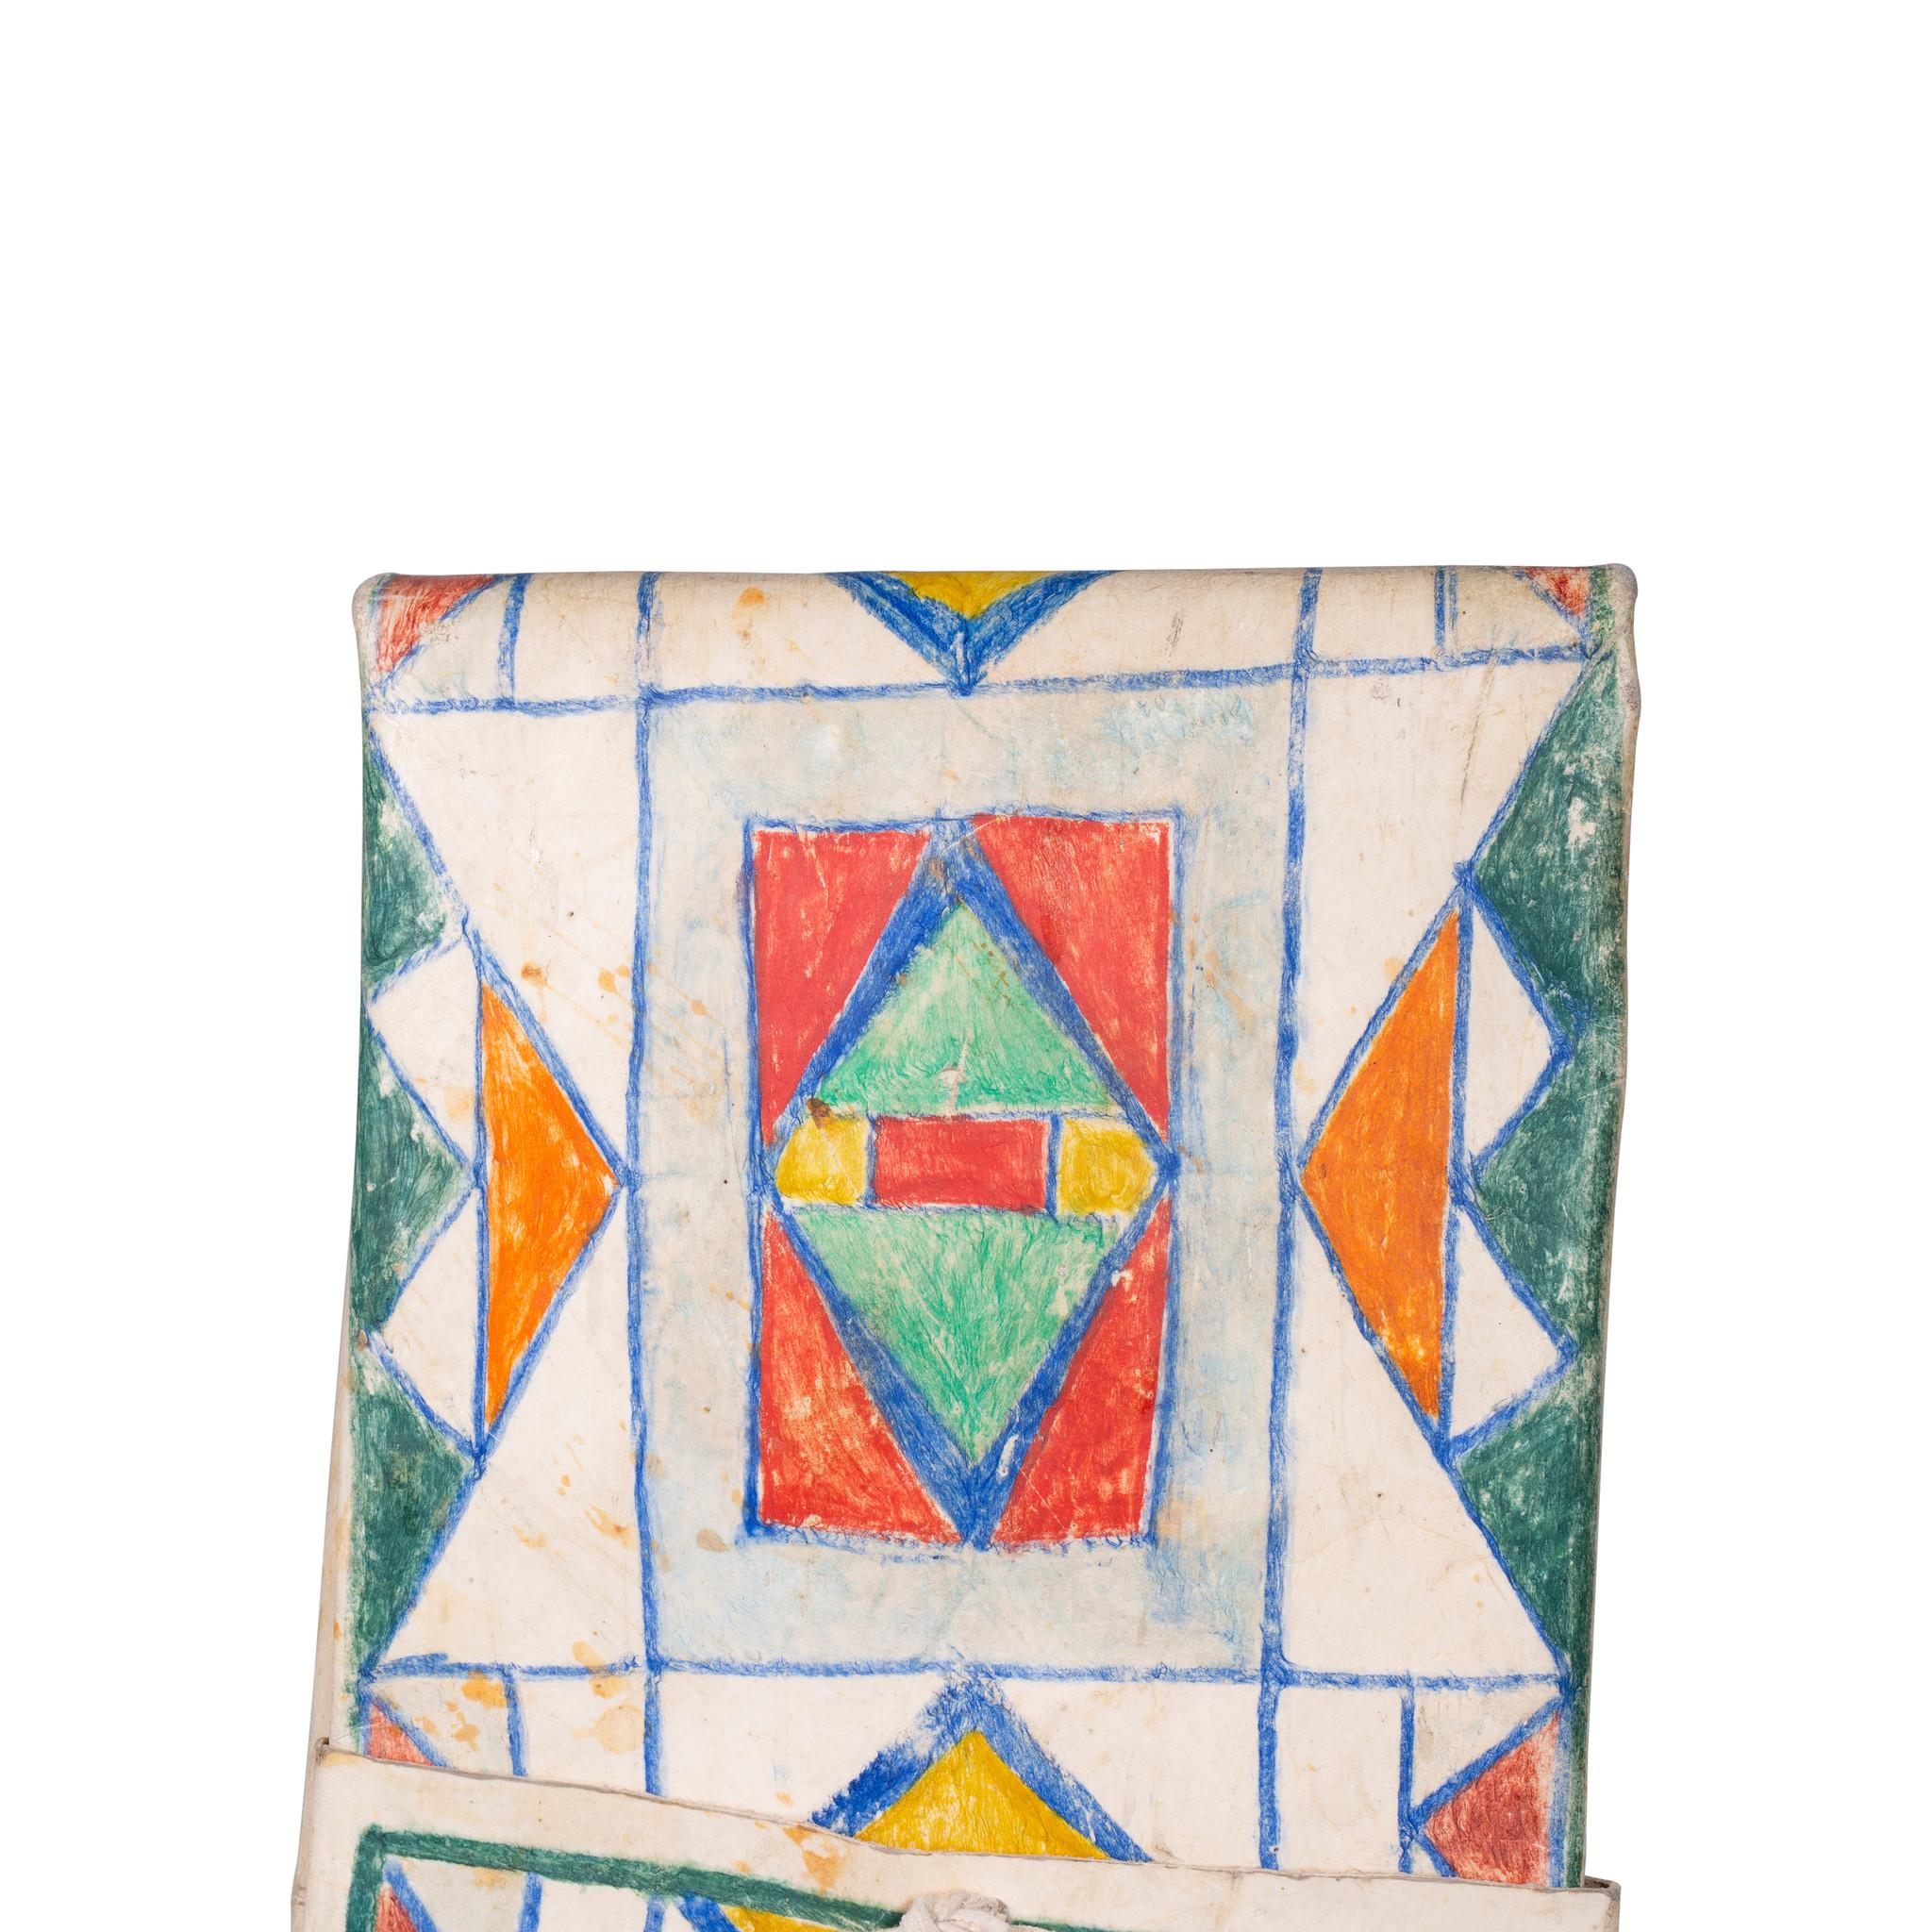 Plateau painted parfleche envelope painted in green, blue, orange, yellow and red.

Period: circa 1900
Origin: Plateau
Size: 28